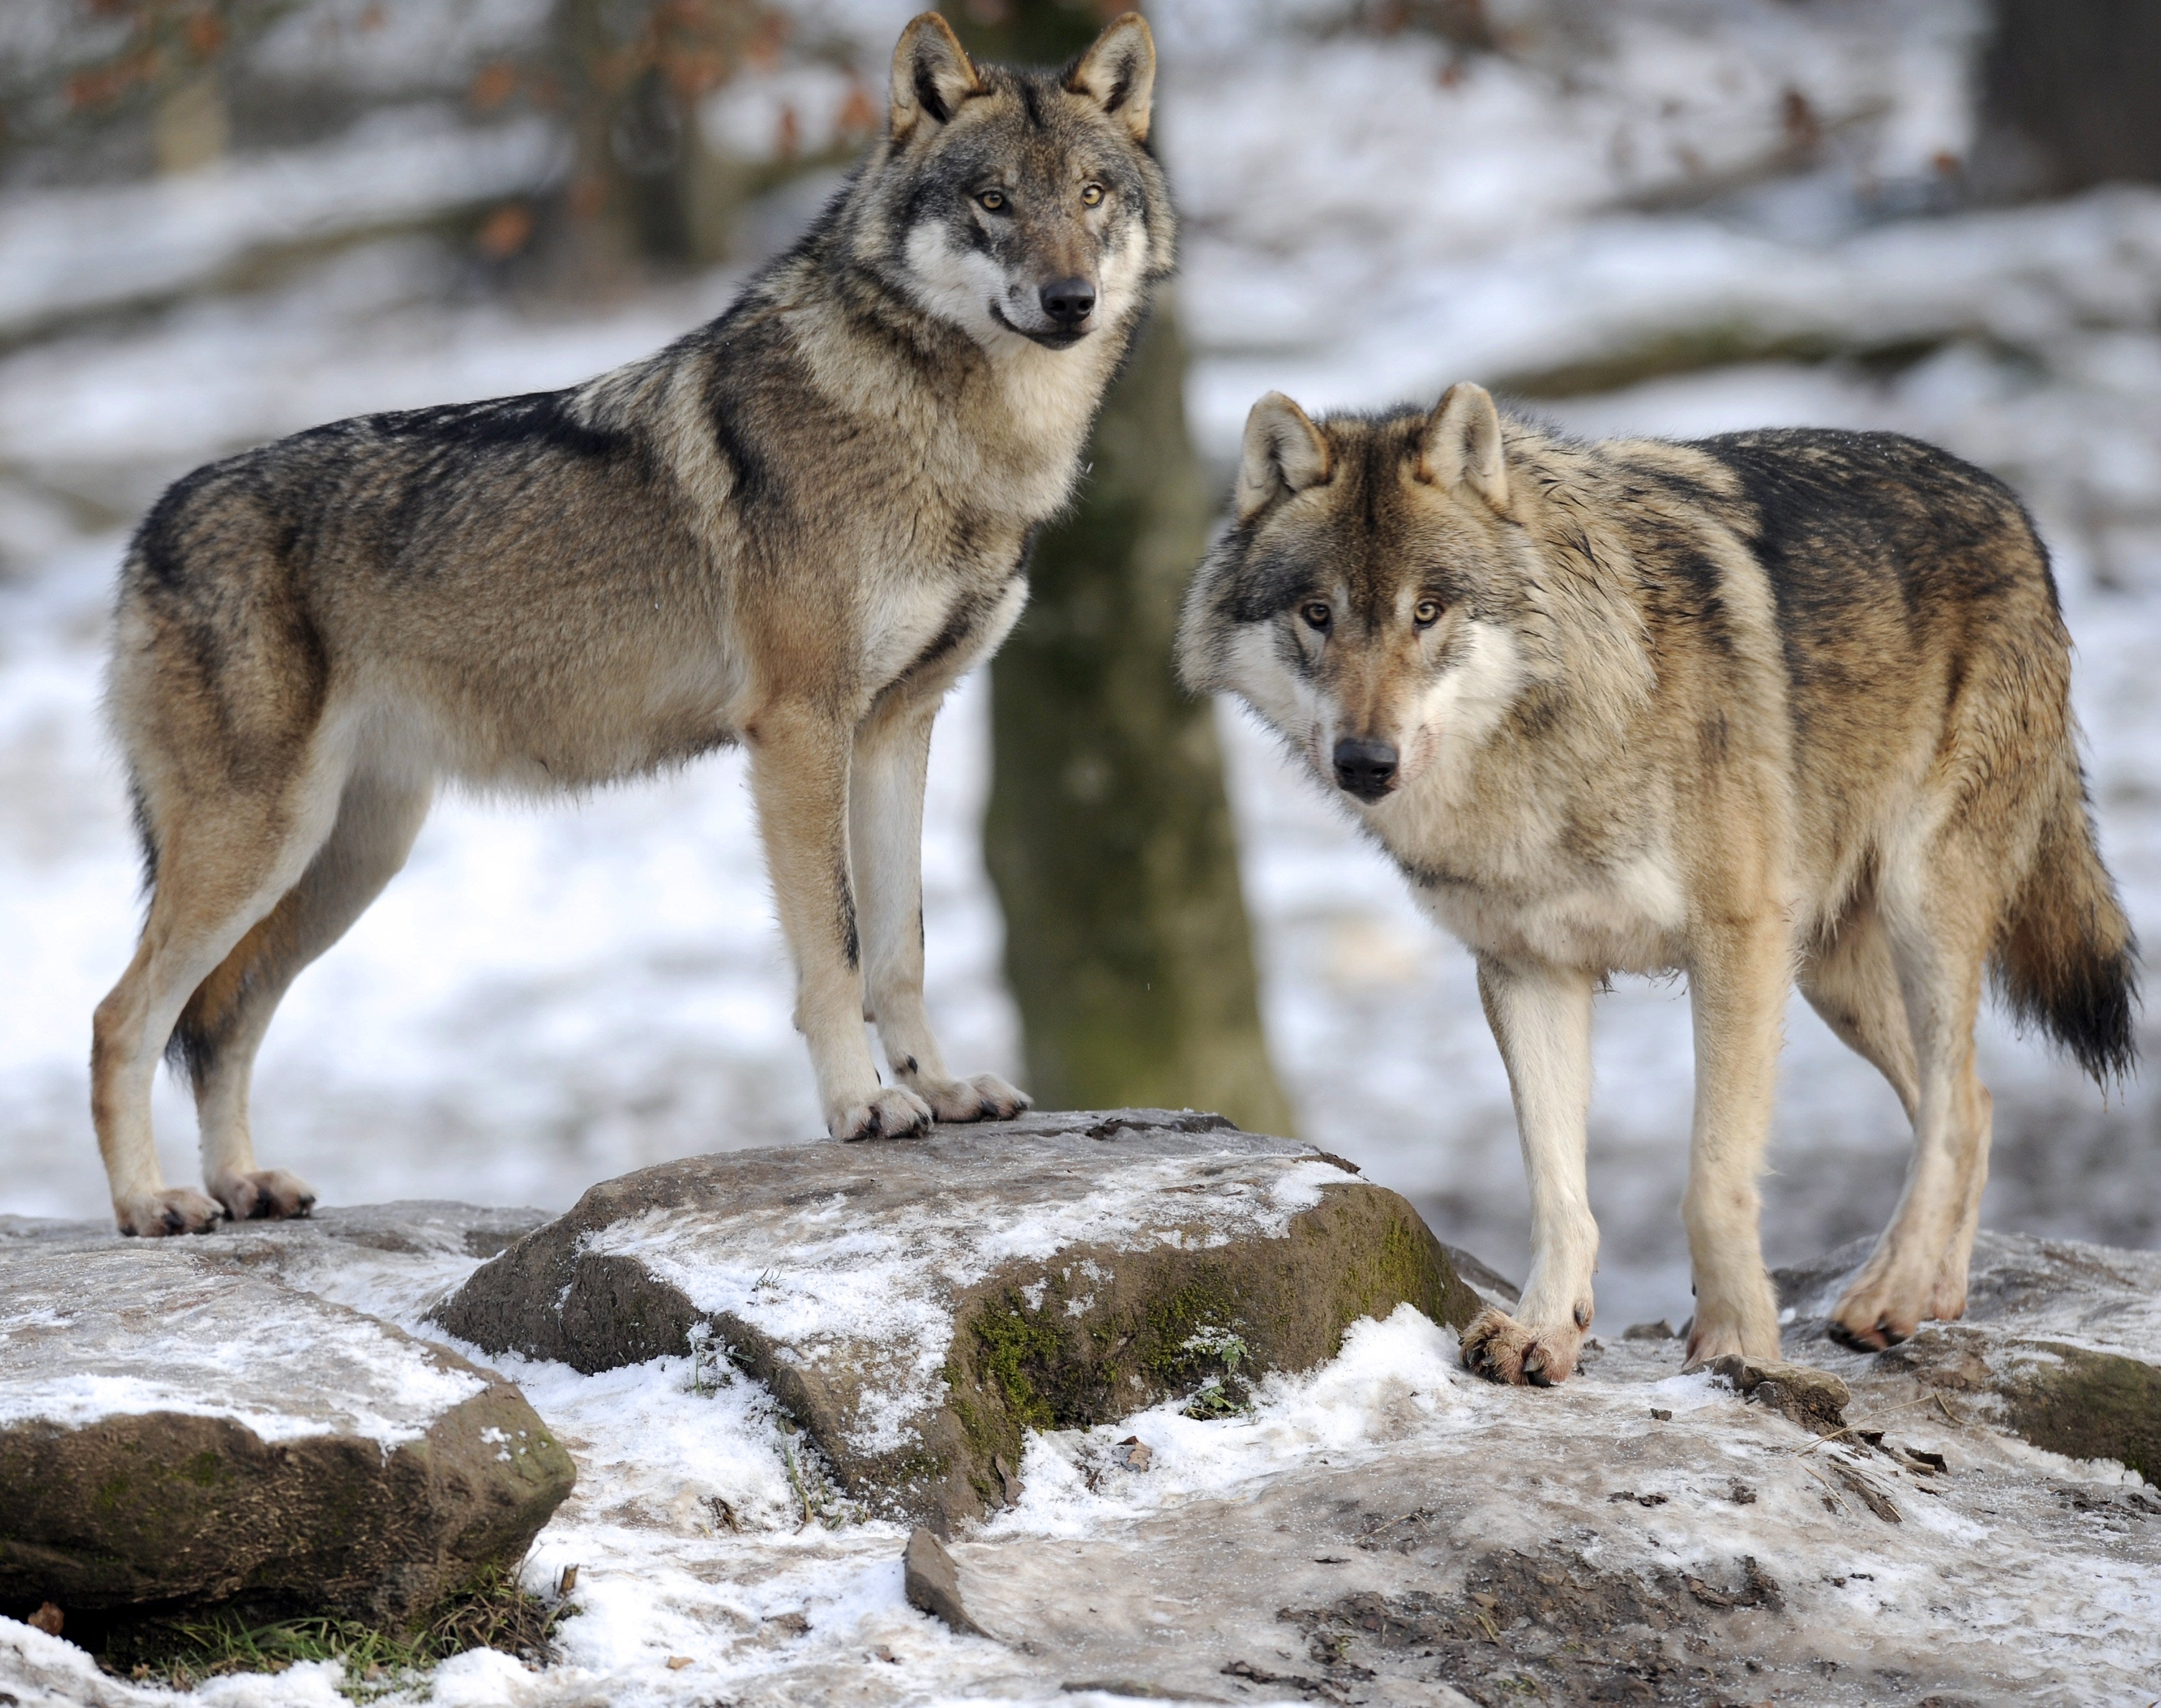 Grey wolves in the northern Rocky Mountains of Idaho, Montana and Wyoming continue to fall under state jurisdiction